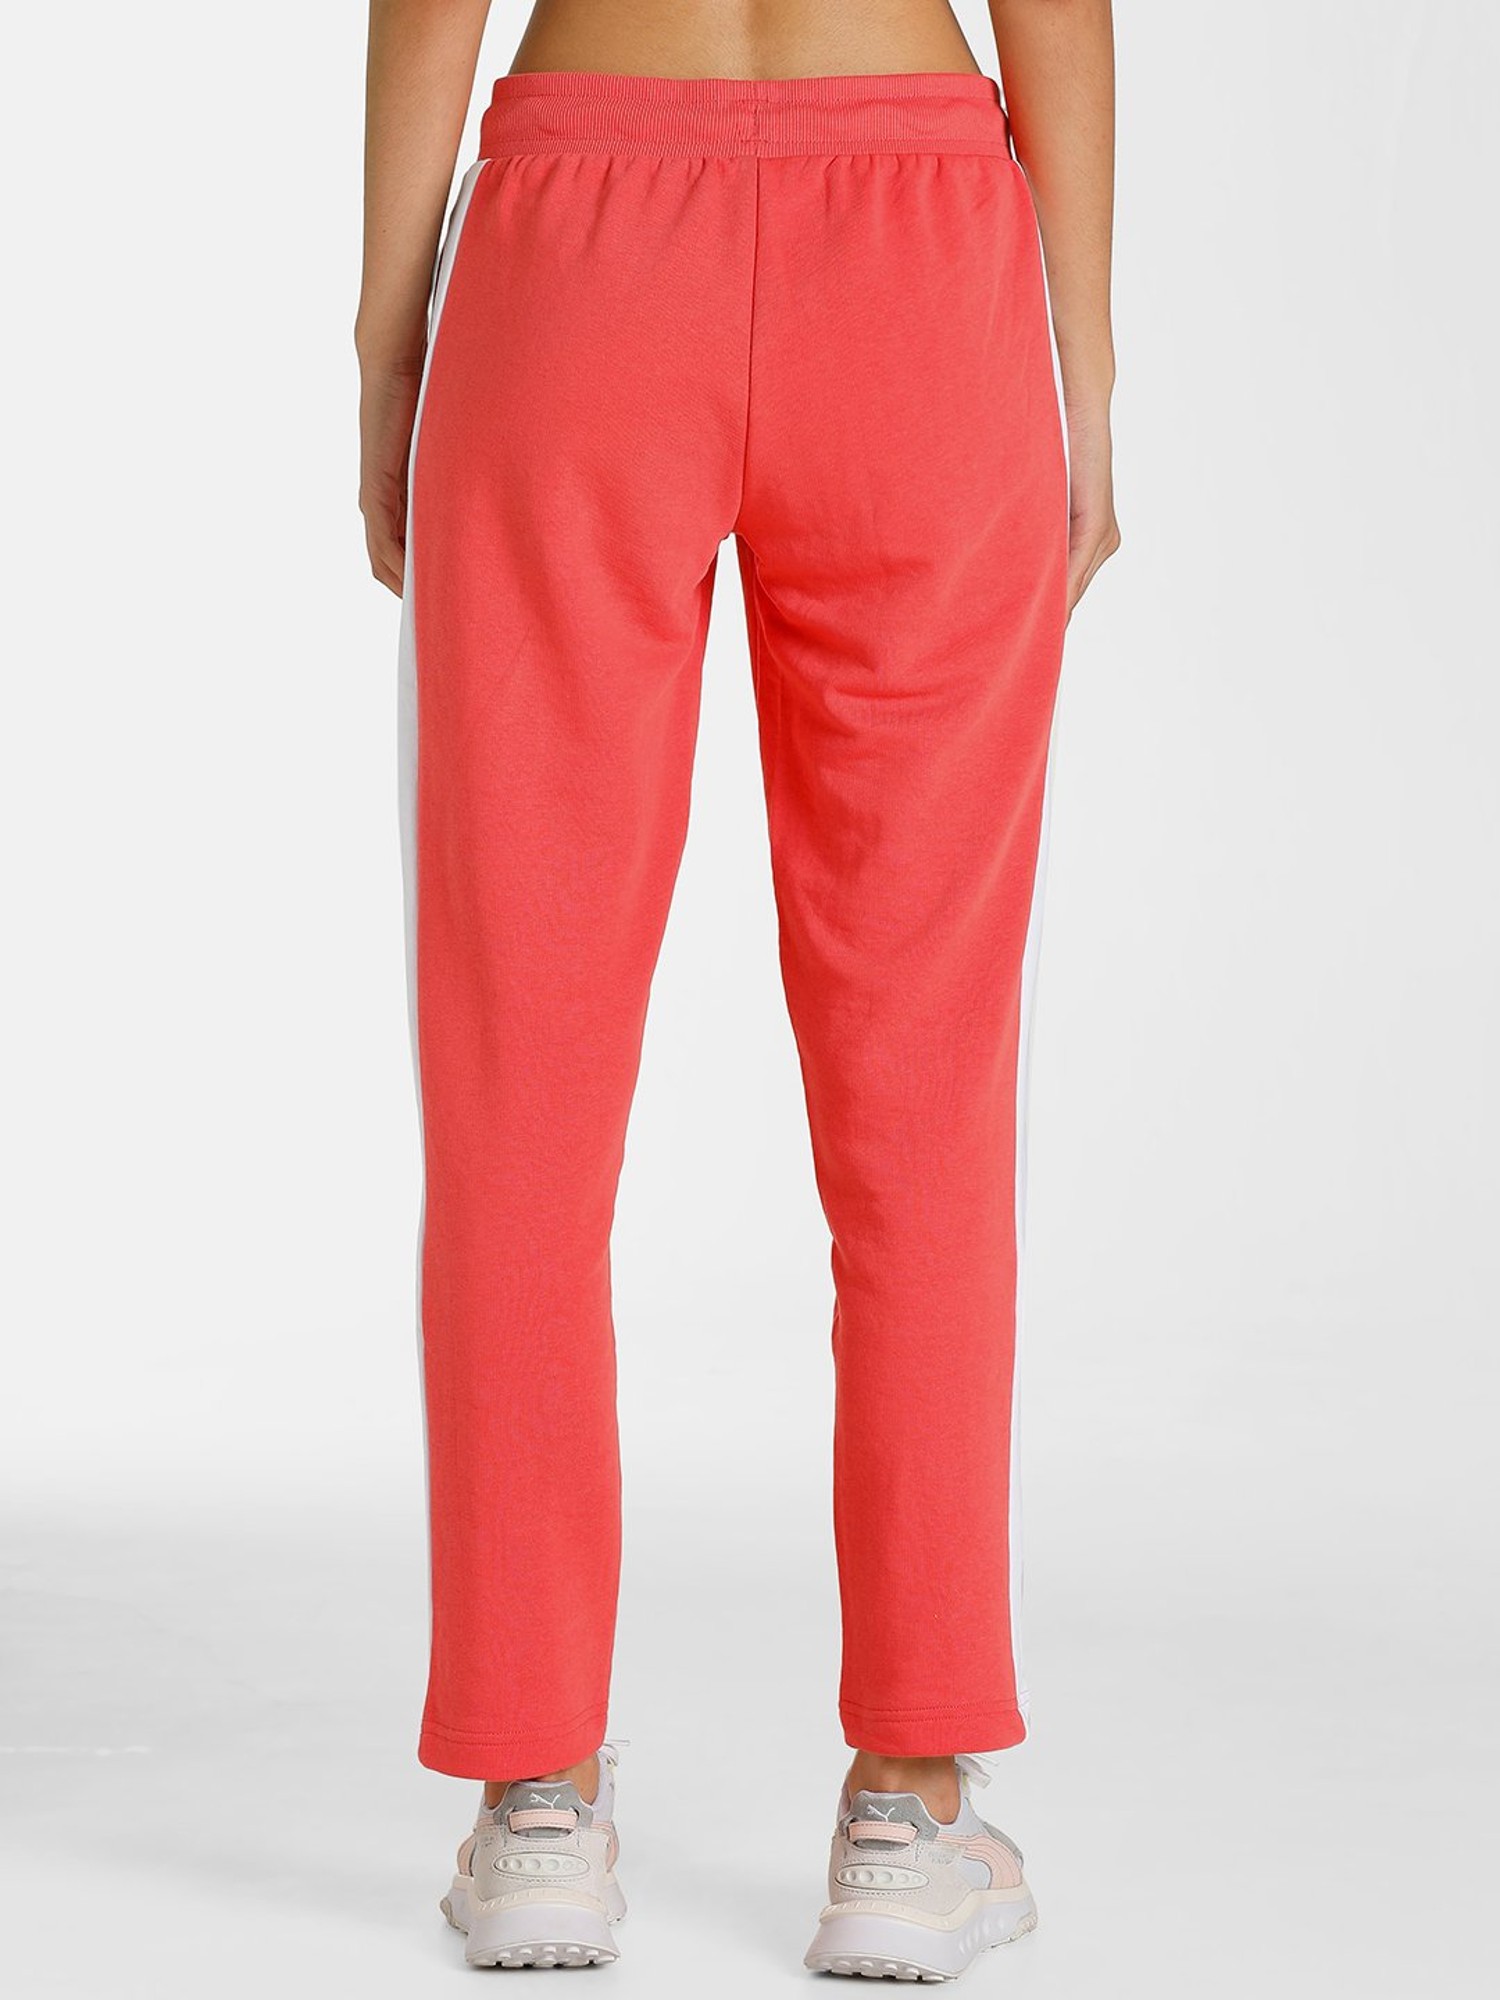 Buy Track Pants from top Brands at Best Prices Online in India | Tata CLiQ